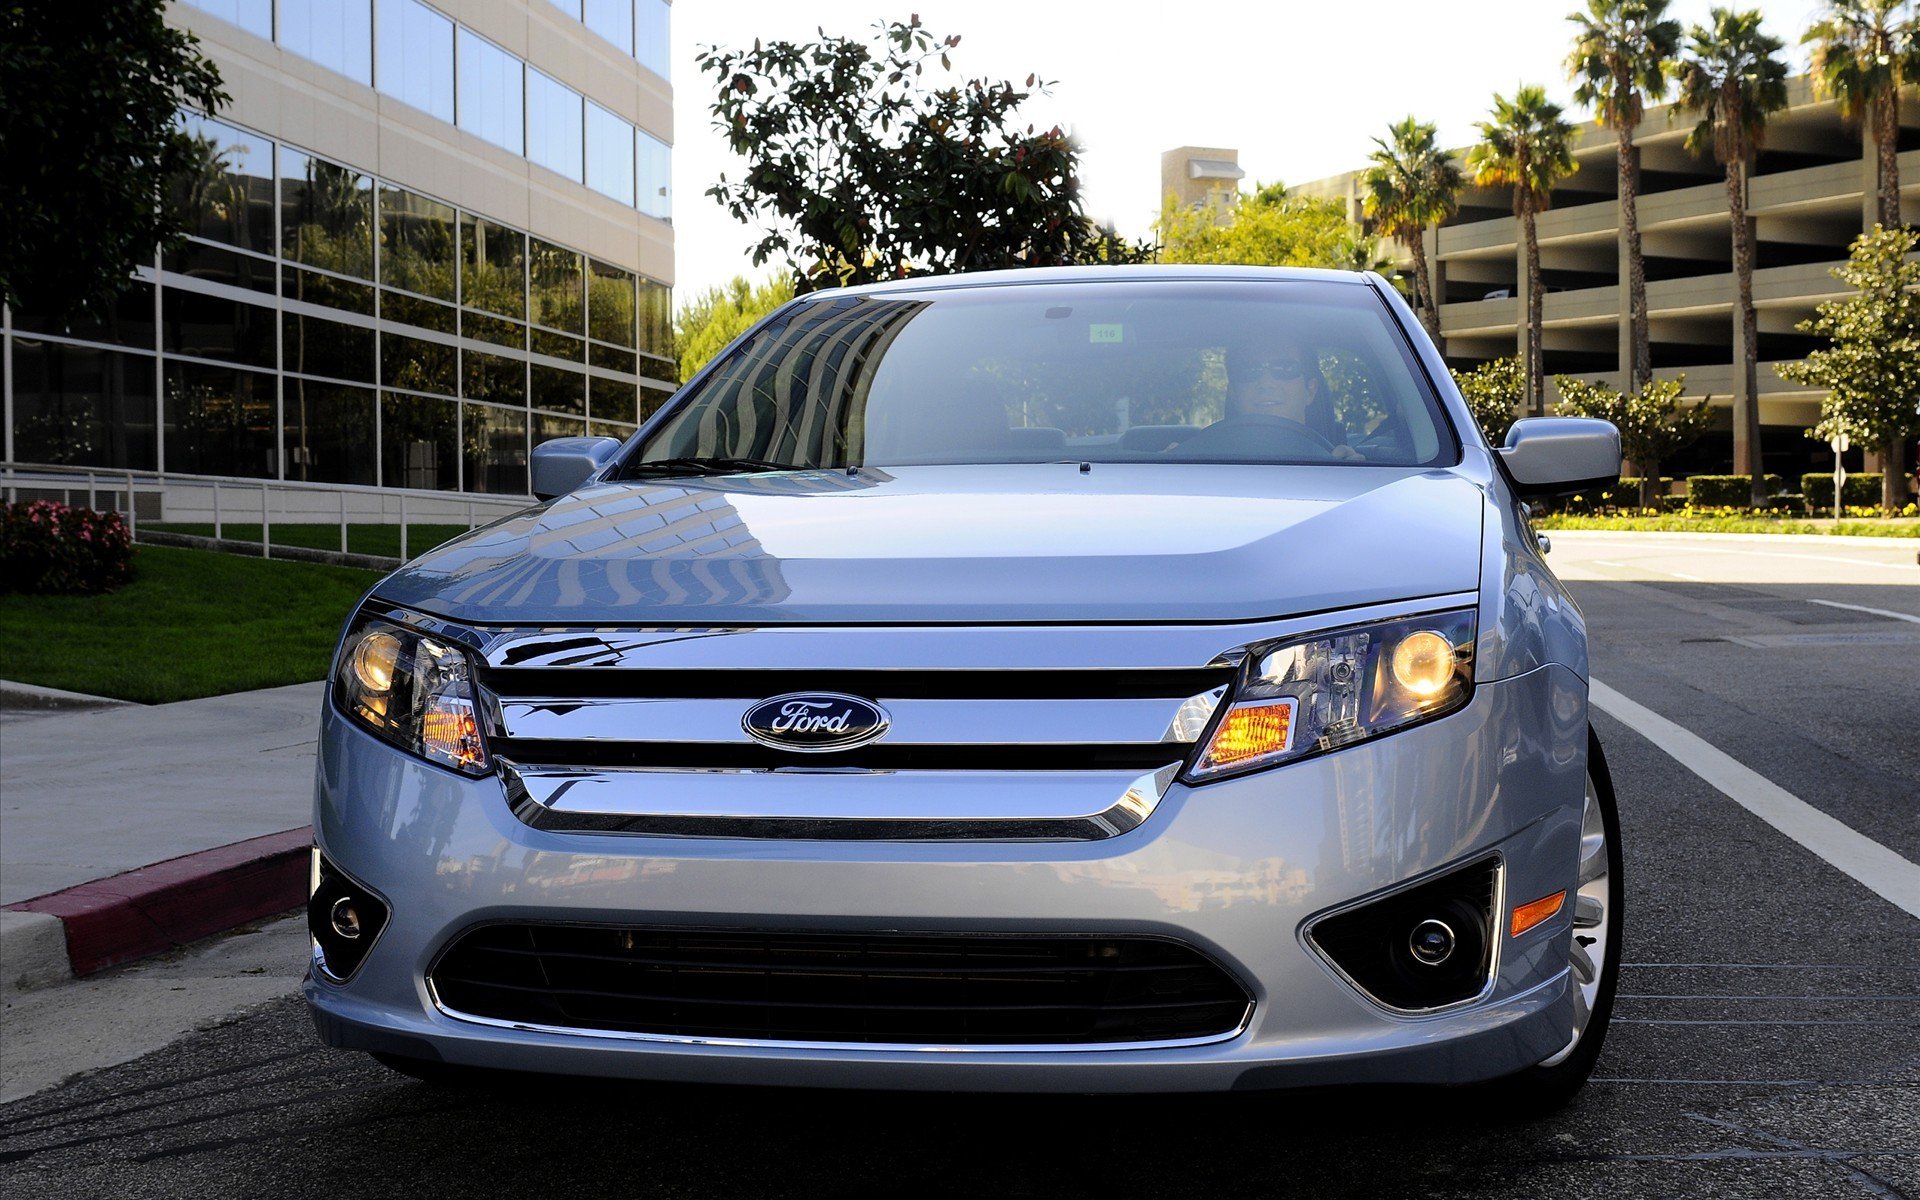 Ford Fusion Hd Wallpapers Background Images